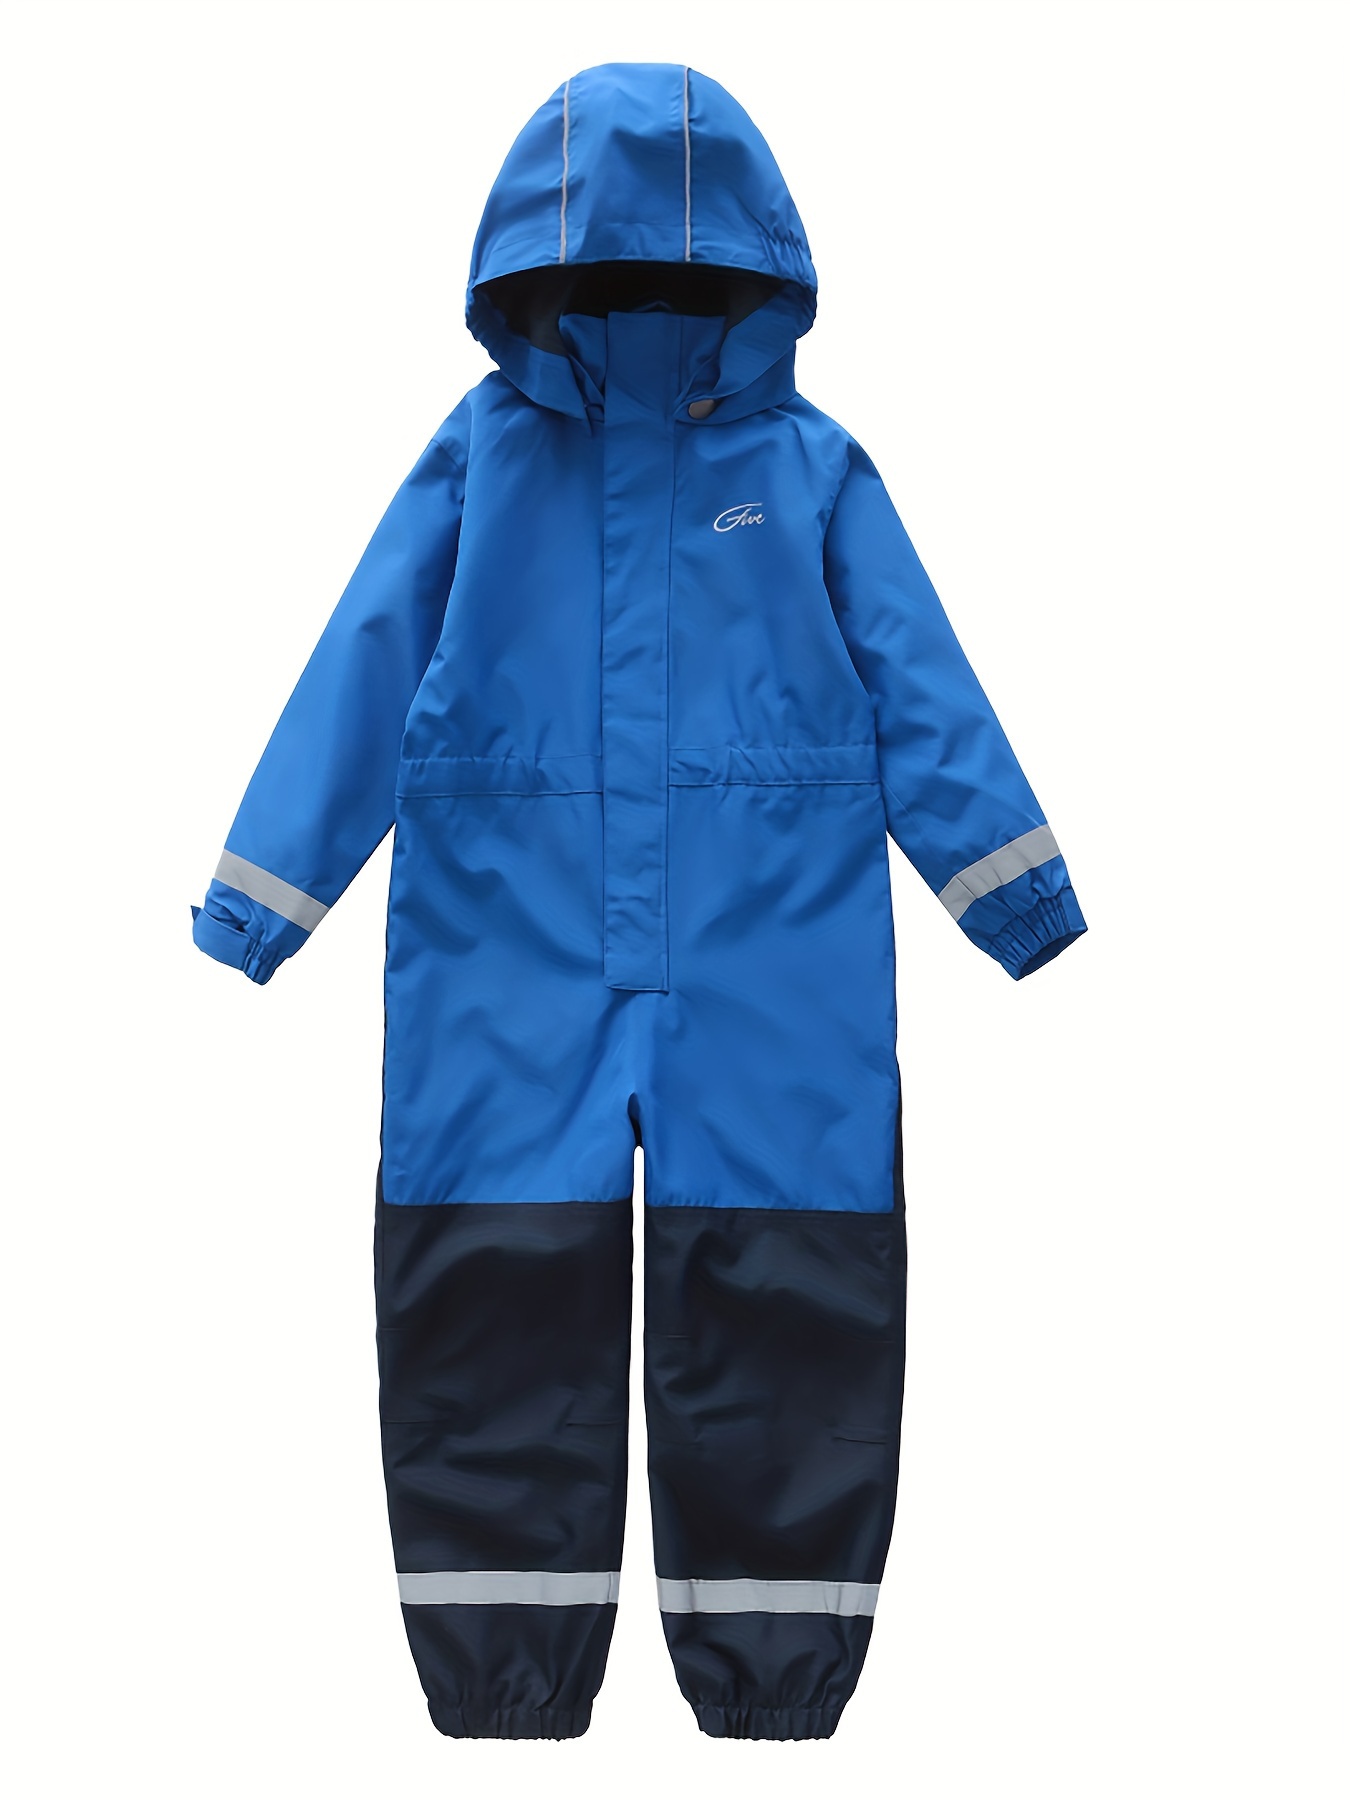 boys blue waterproof hooded overalls perfect for outdoor activities with durable long lasting material kids raincoat details 0